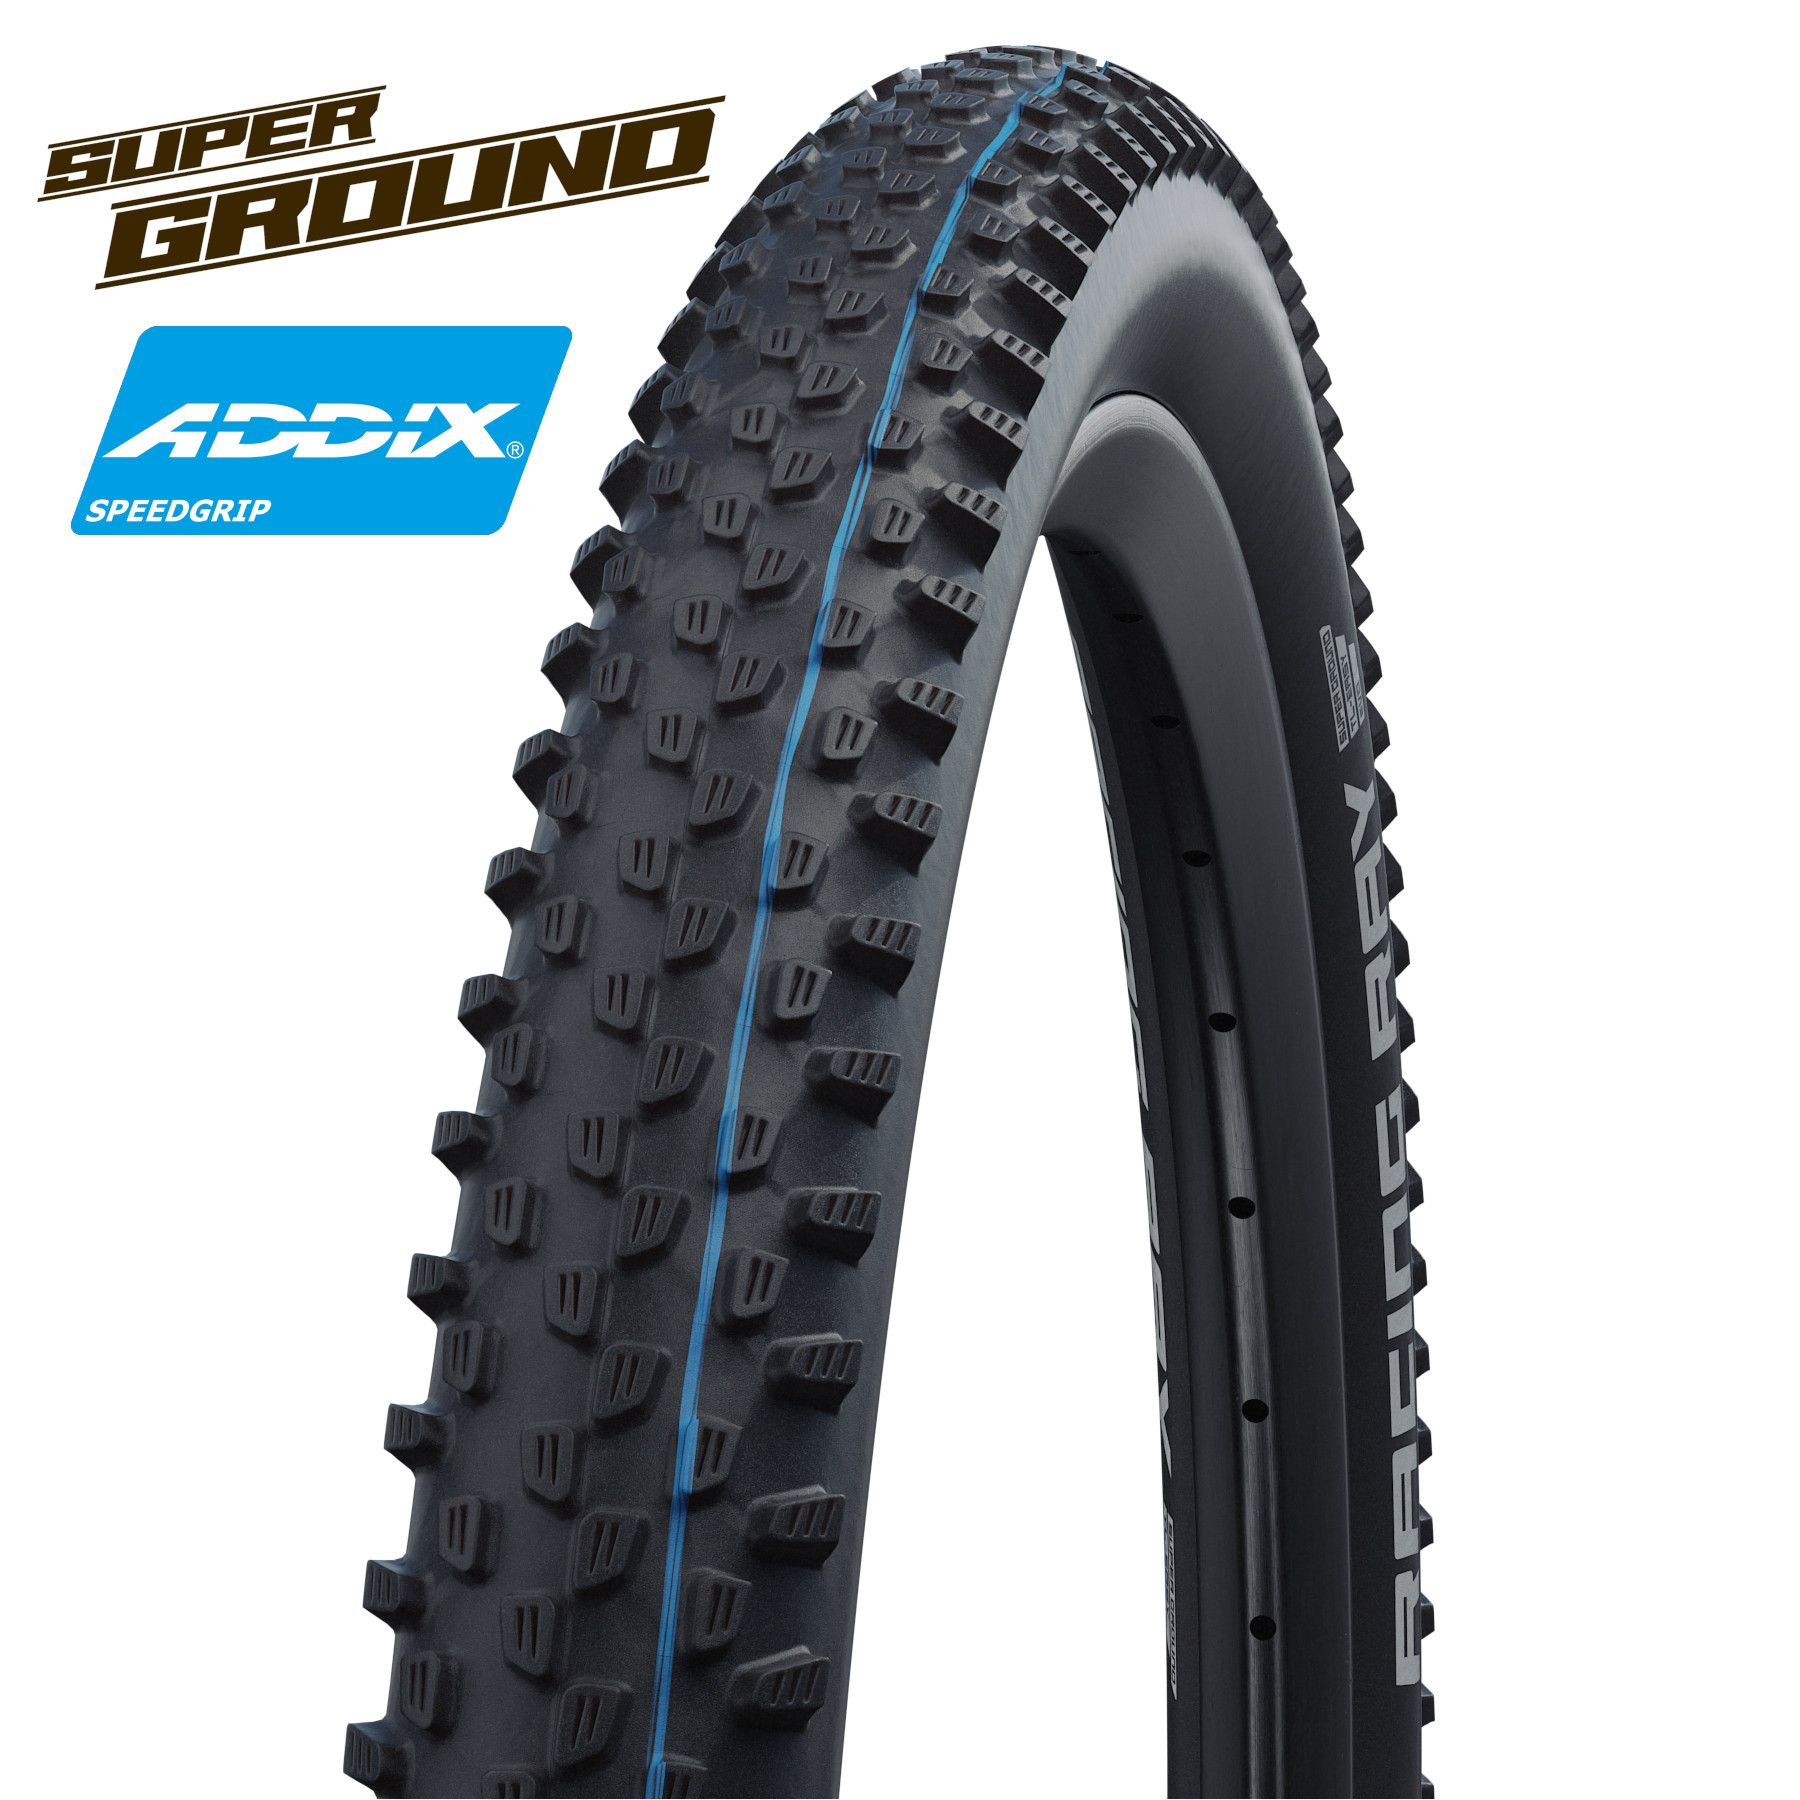 Picture of Schwalbe Racing Ray Evolution MTB Folding Tire - AddixSpeedGrip - SuperGround - TLEasy - E-25 - 26x2.25 Inches